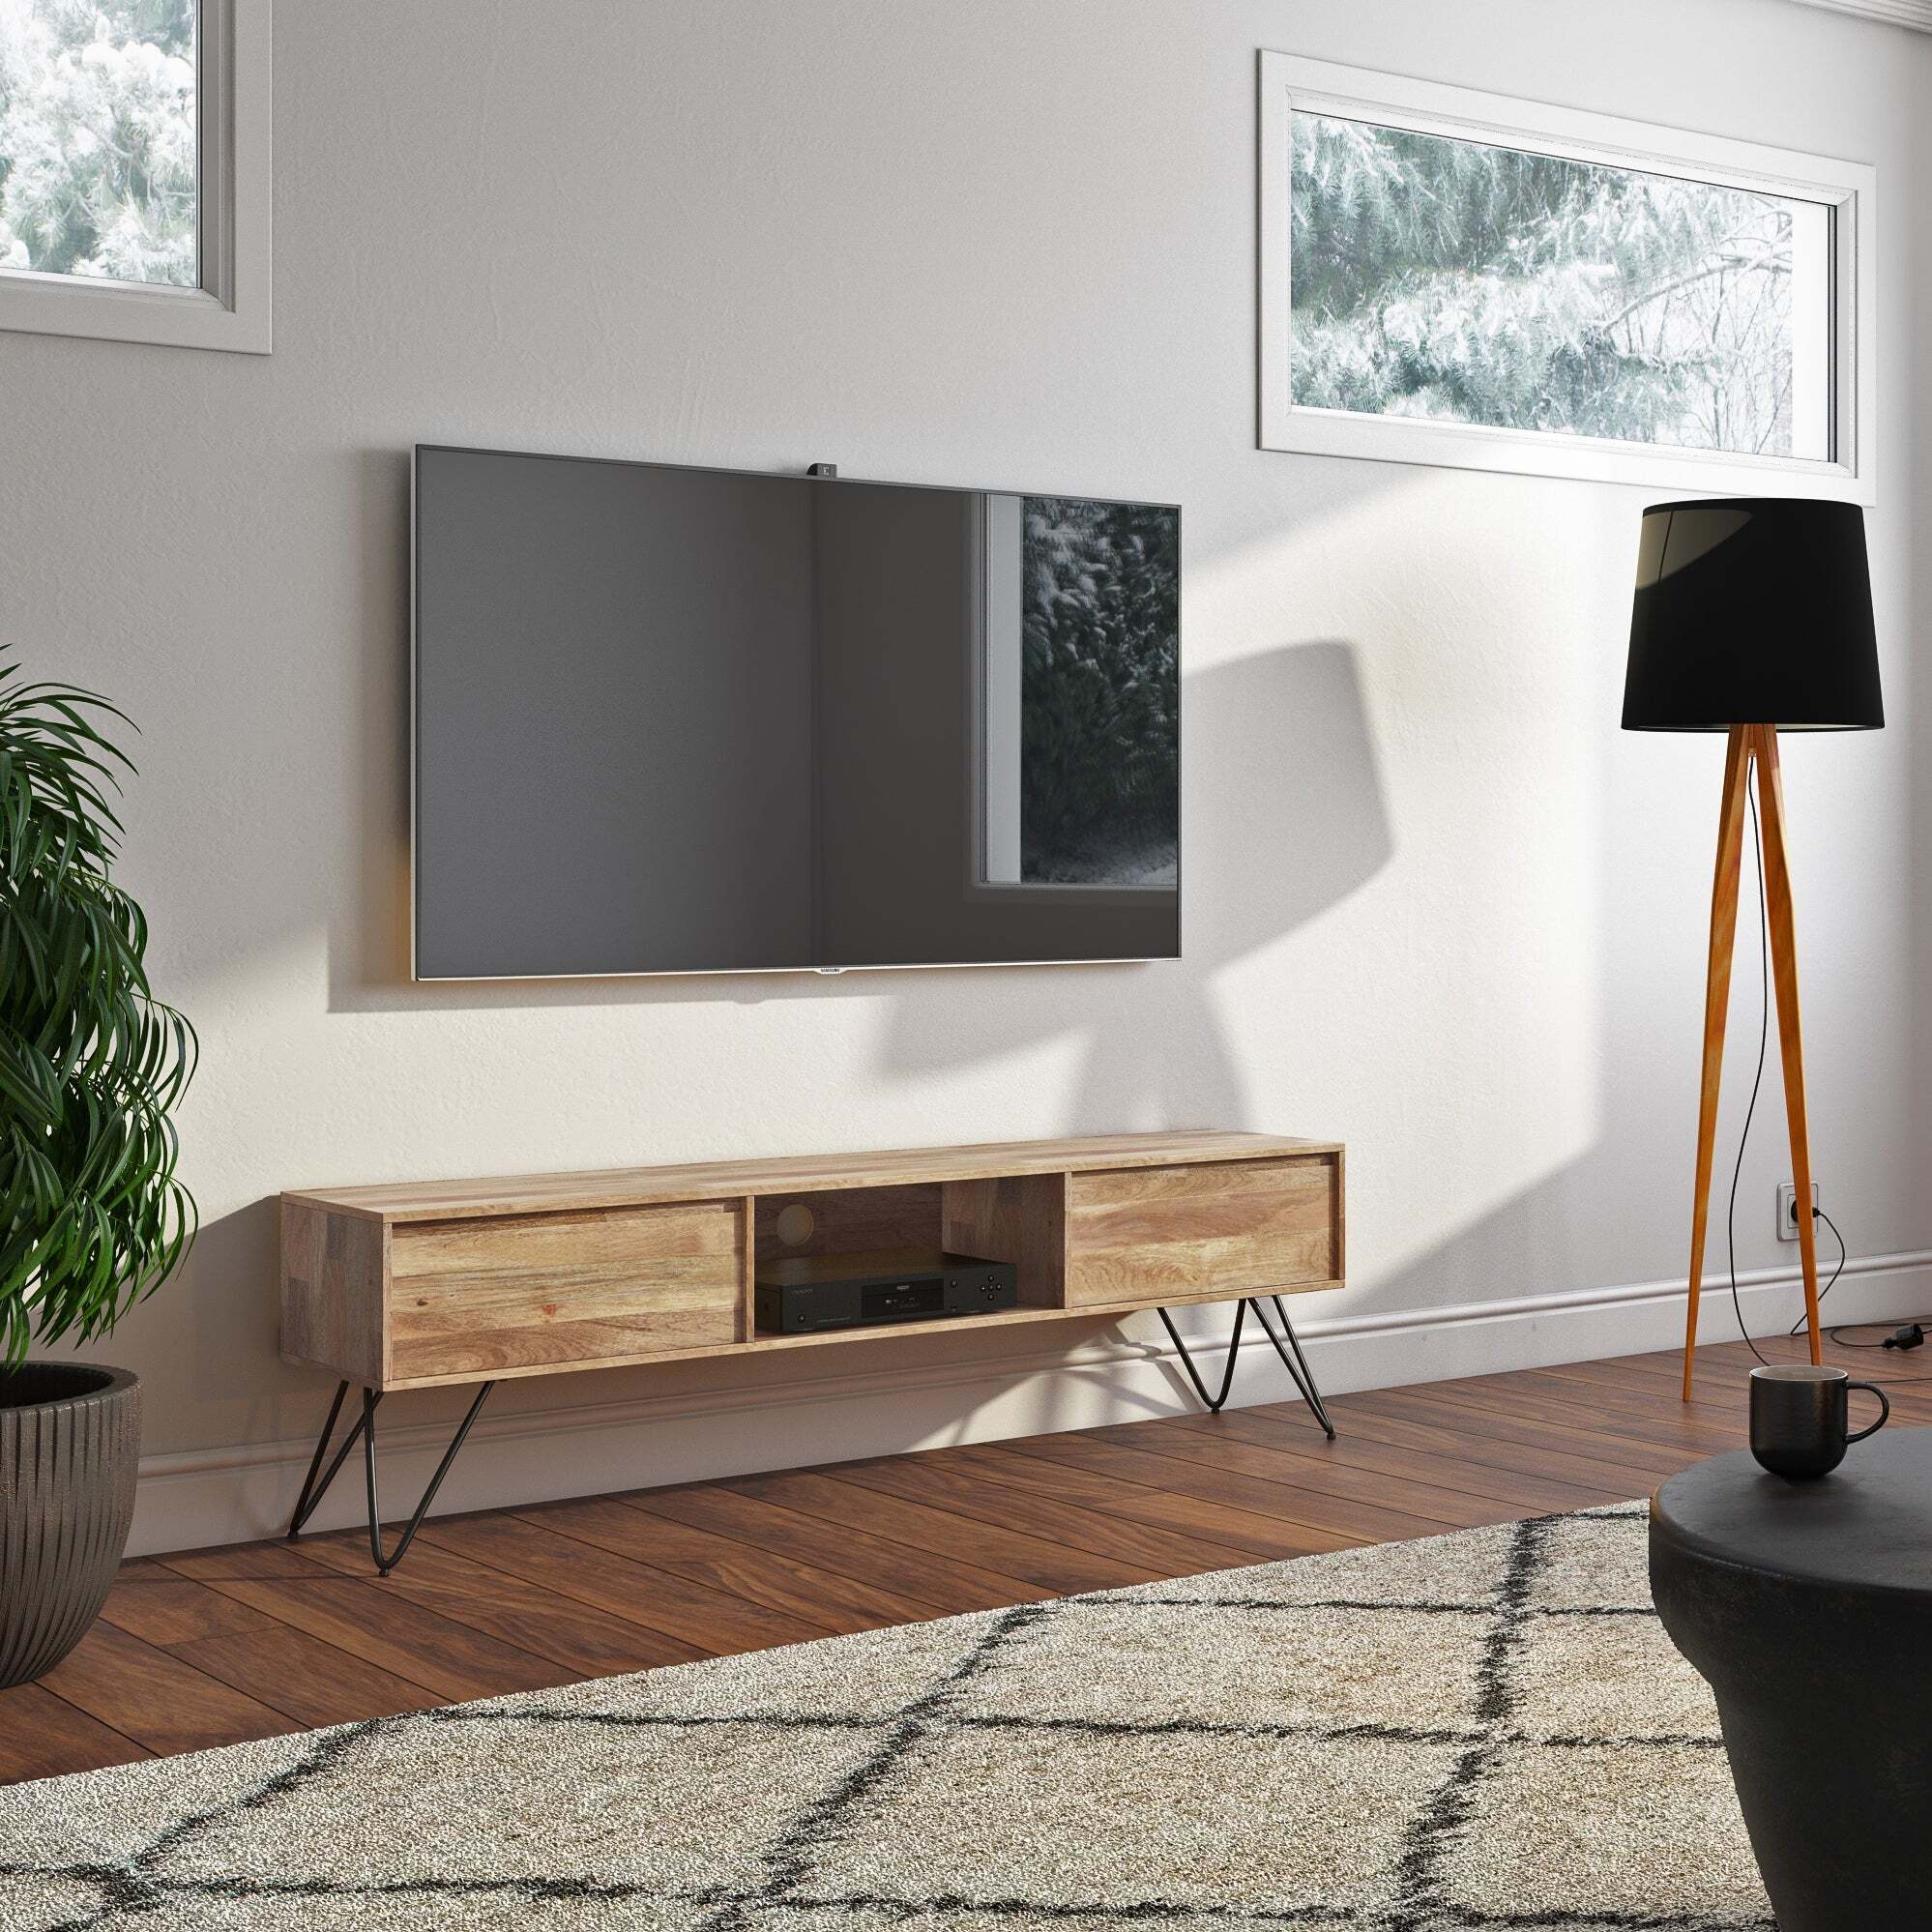 Low profile TV cabinet for small spaces